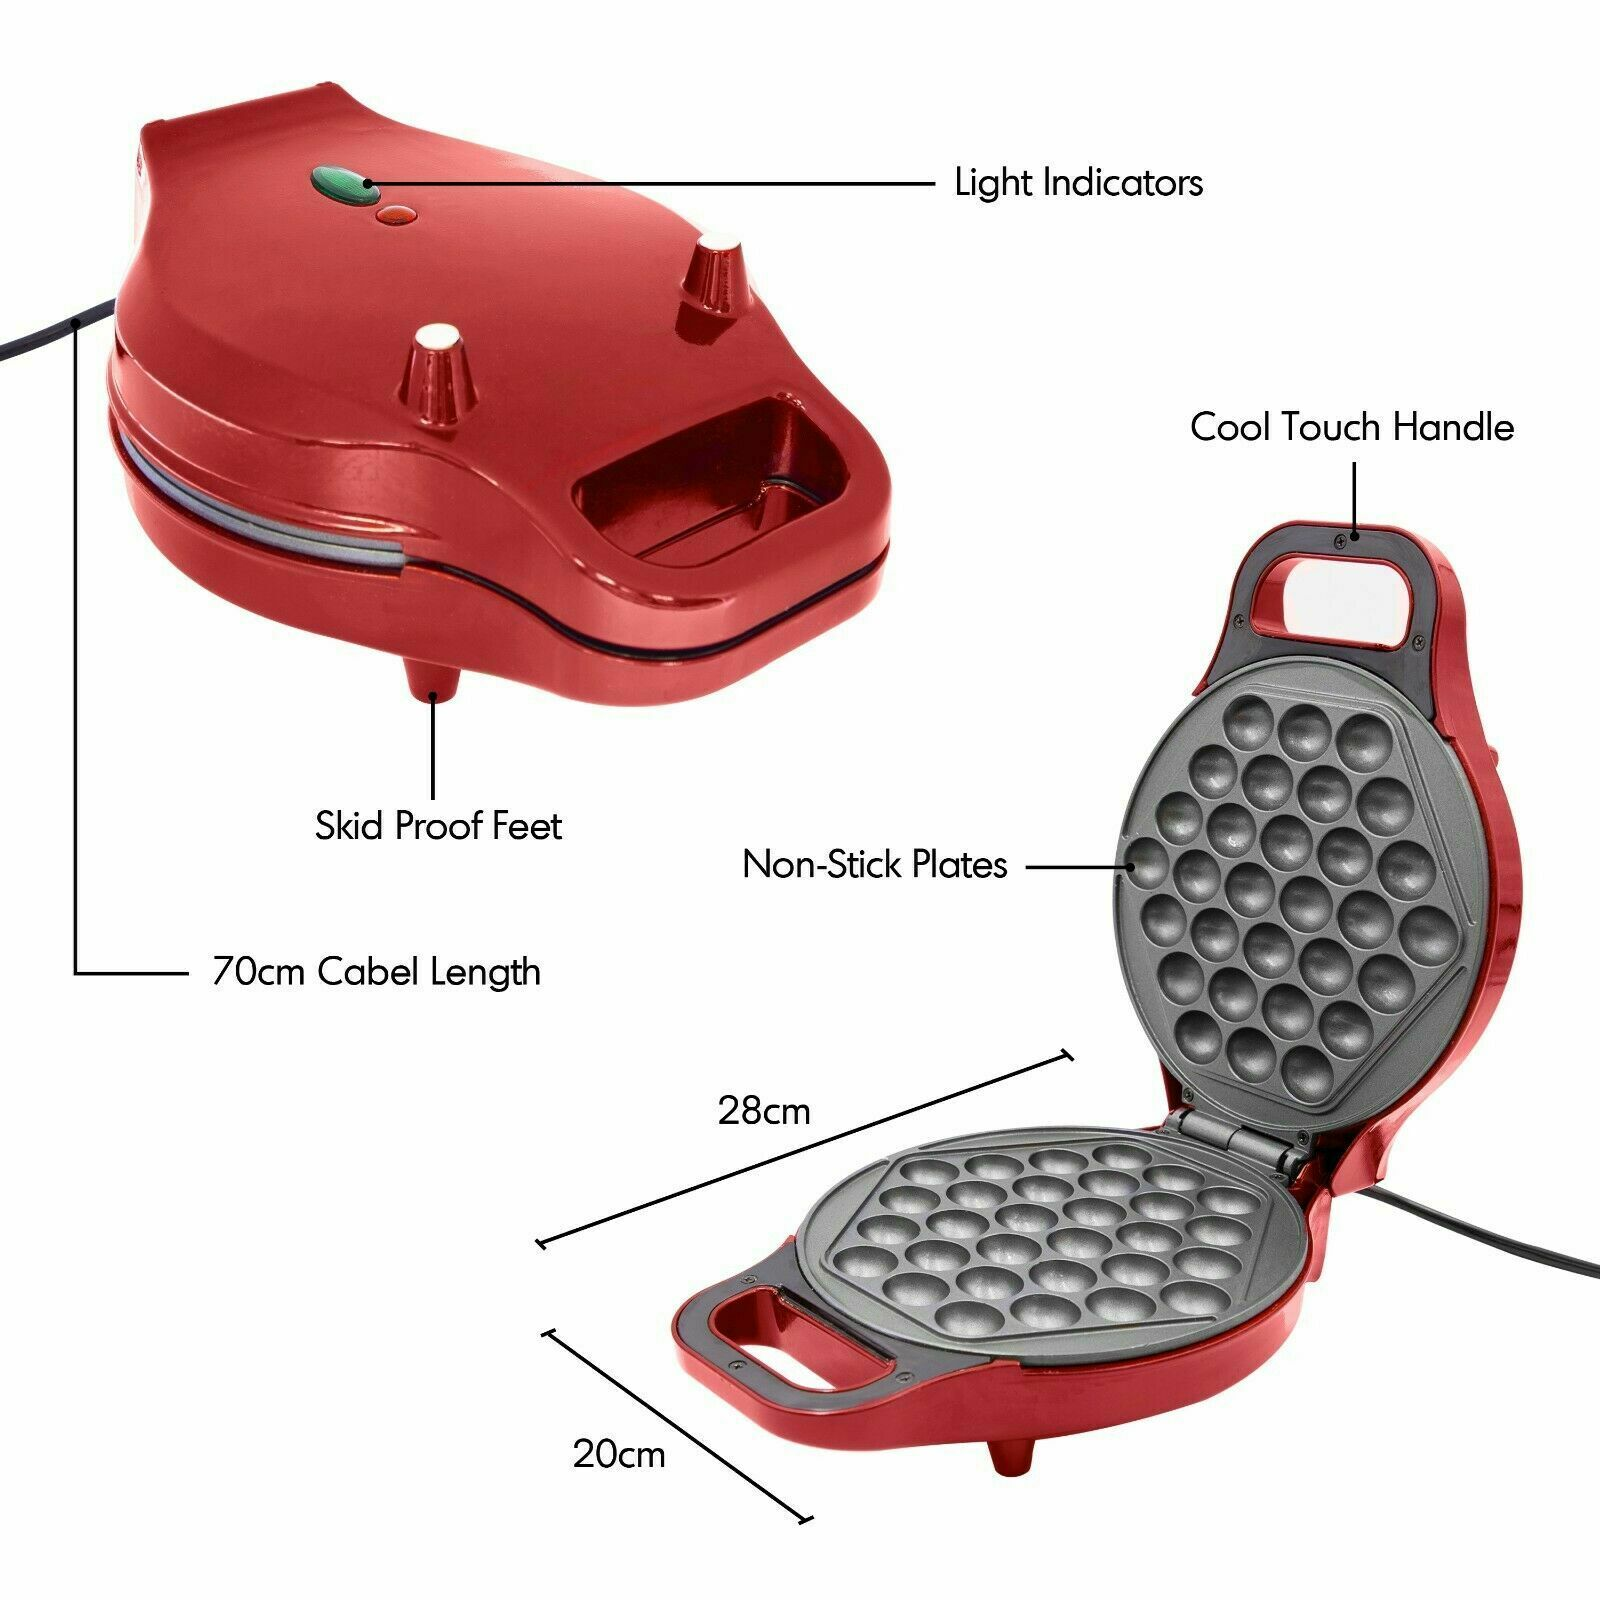 Bubble Waffle Maker rotate the churros maker so the batter is distributed evenly, and you make perfectly shaped churros every time waffles systems system Sticks stick Rotary Red pans pan Non-drip non stick non Metallic metal Making Makers make eggs egg cookware cooks cooking cookers cook cakes cake bubbles 700W 180°